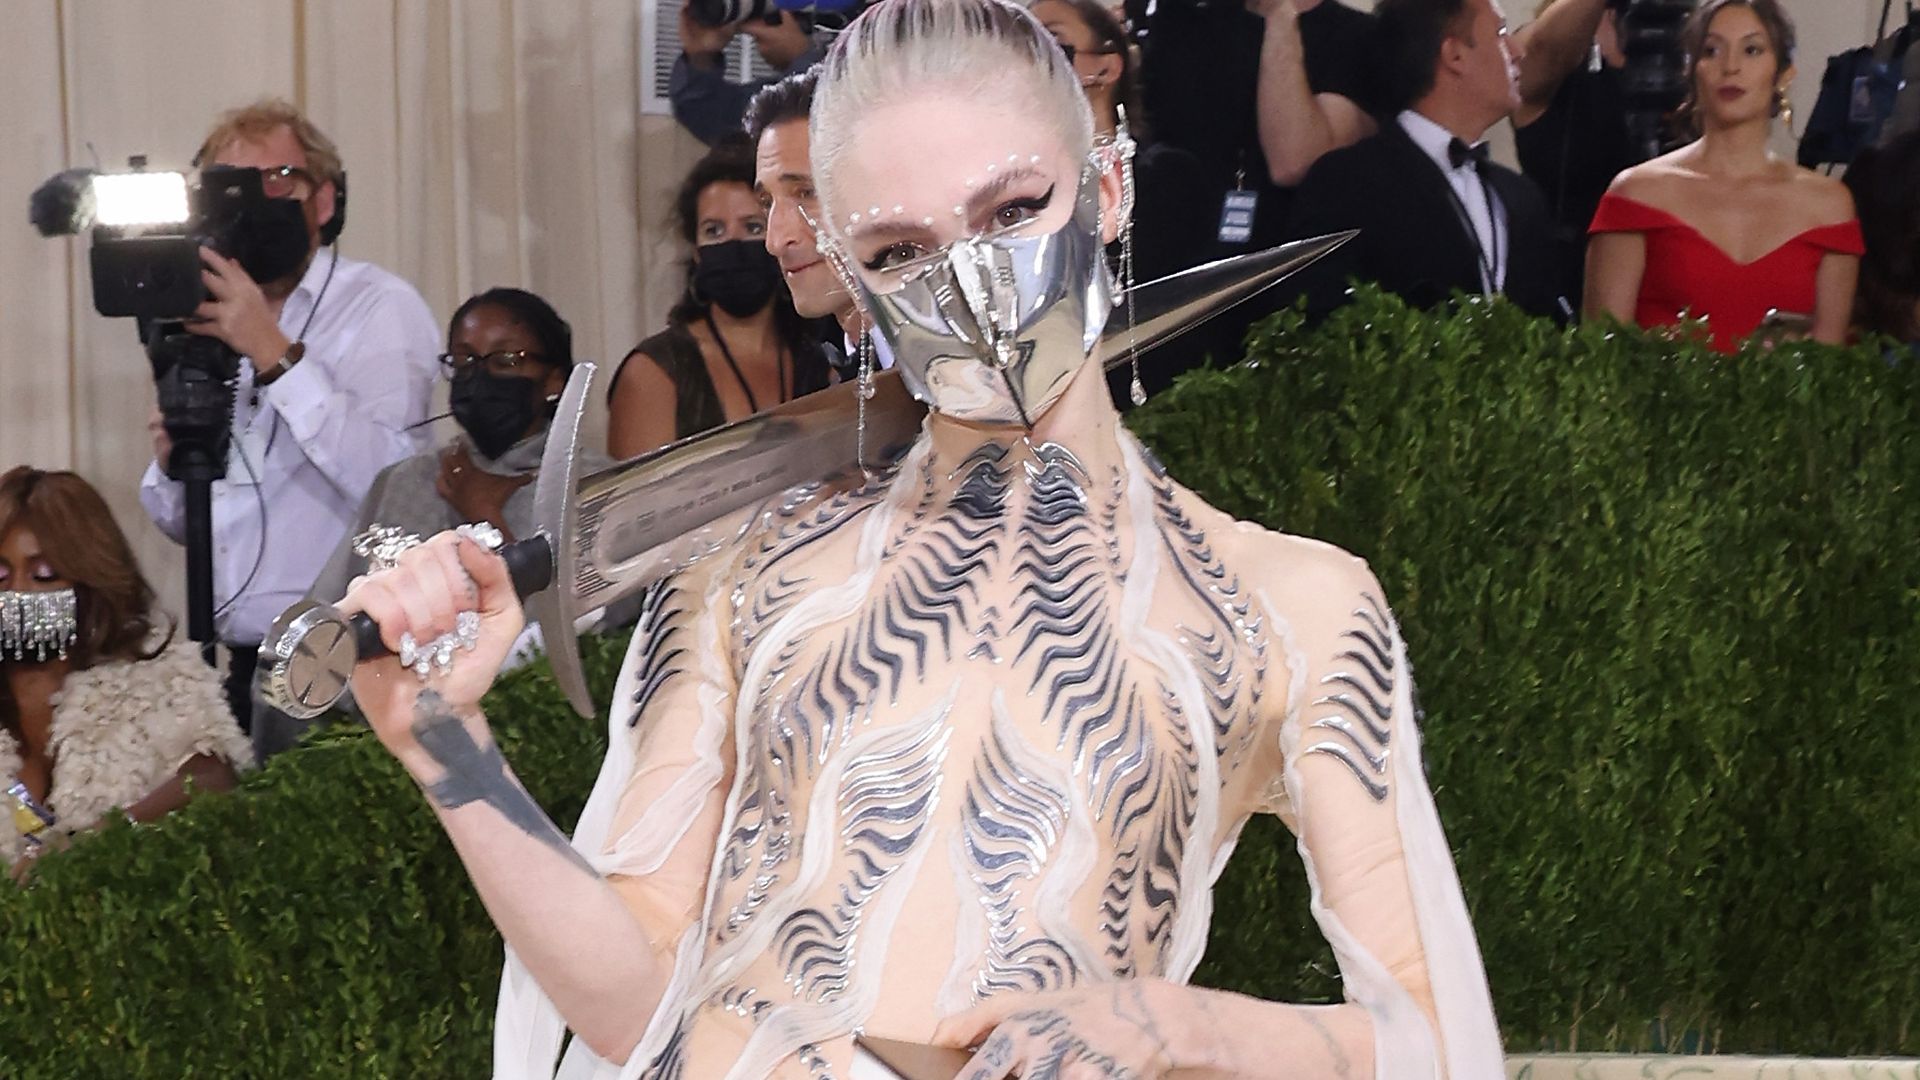 Grimes at the Met Gala 2021 wearing a metal mask and holding a sword on her shoulder